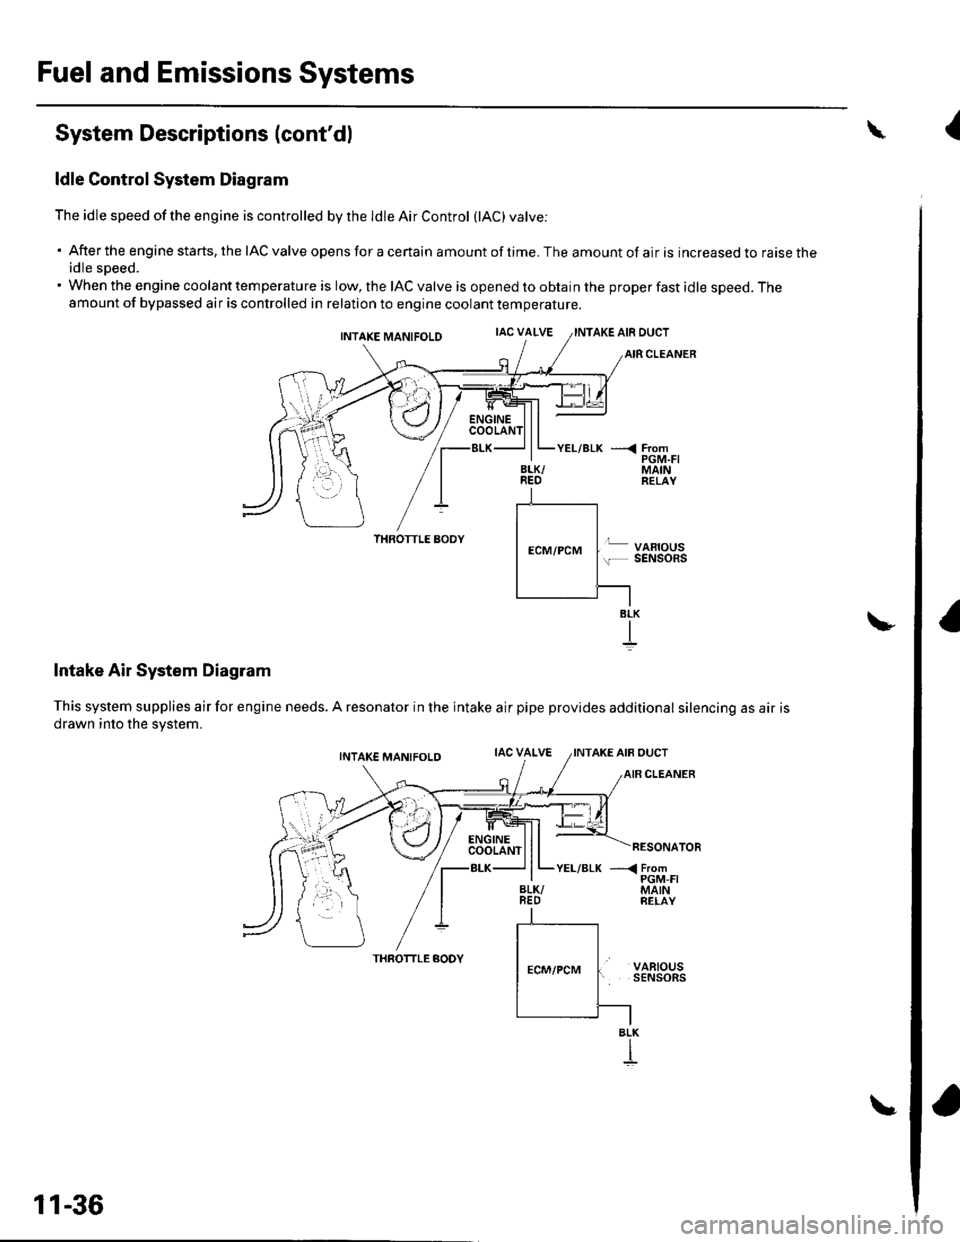 HONDA CIVIC 2003 7.G Workshop Manual Fuel and Emissions Systems
System Descriptions (contdl
ldle Control System Diagram
The idle speed of the engine is controlled by the ldle Air Control (lAC) varve:
Aftertheenginestarts,theIACvalveope